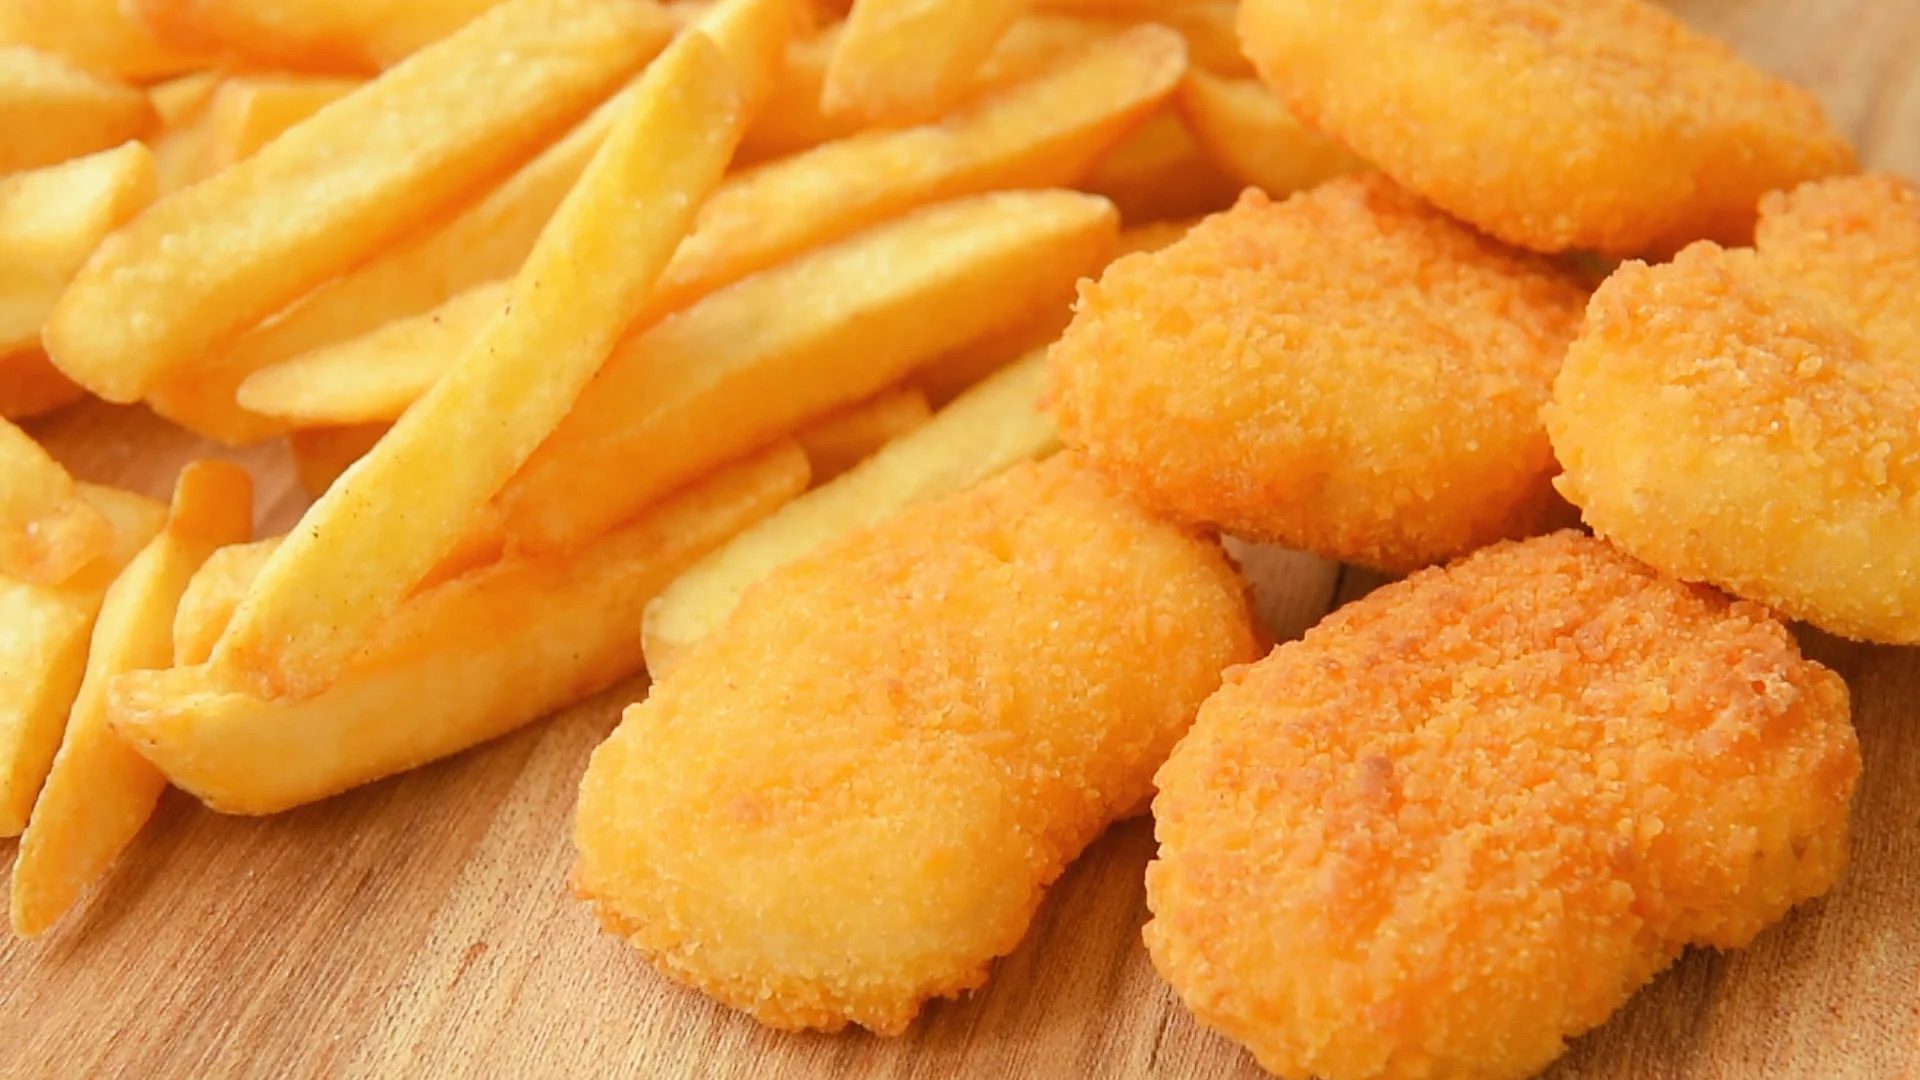 Chicken Nuggets Photos Download The BEST Free Chicken Nuggets Stock Photos   HD Images